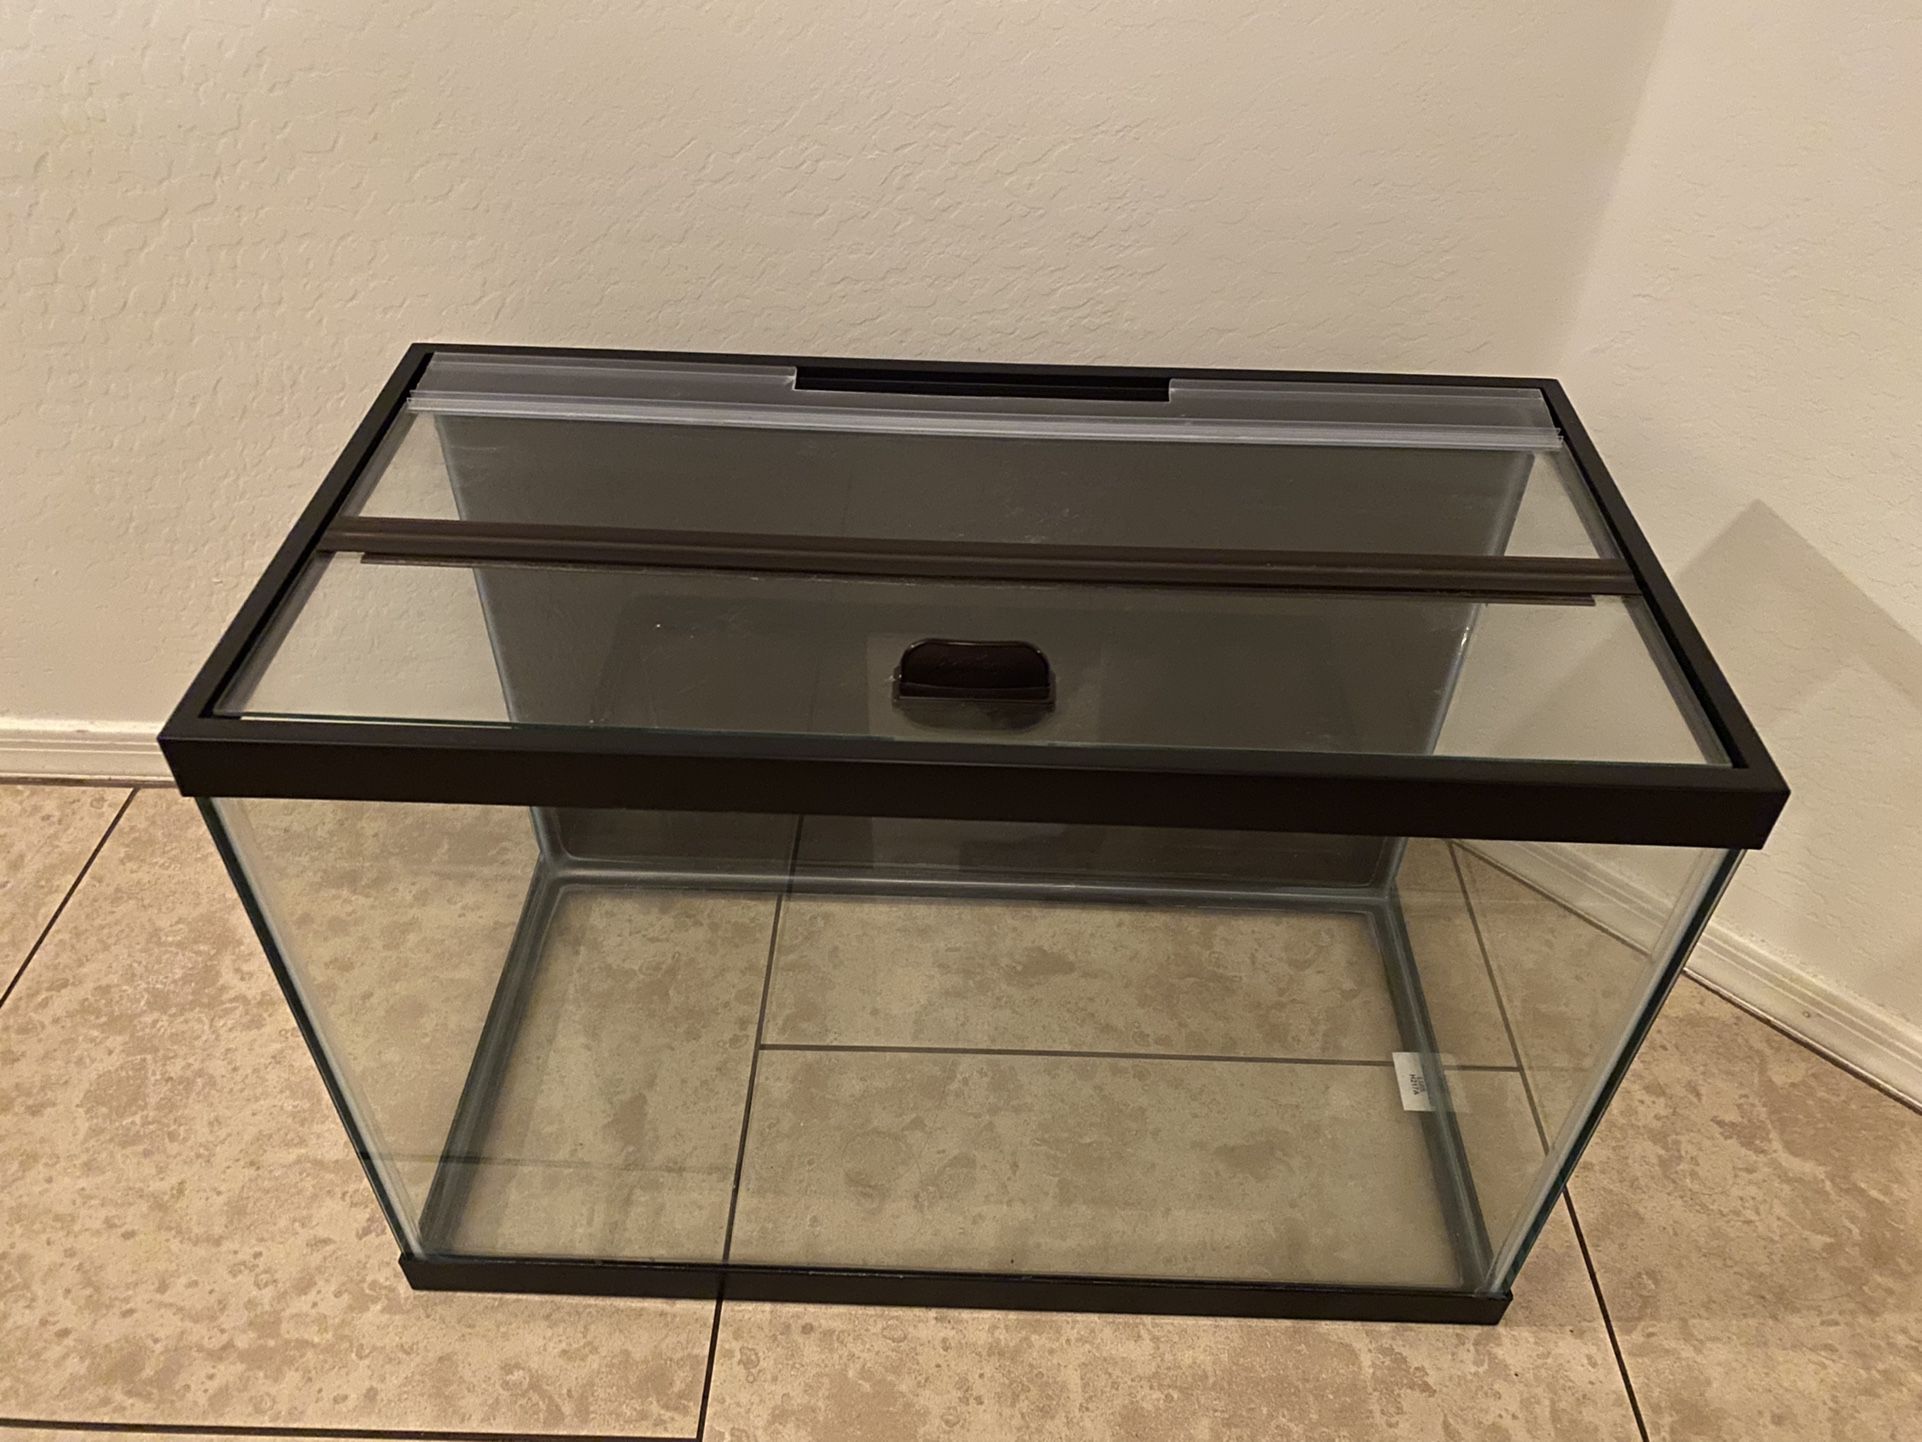 20 Gal Aqueon Fish Tank with LED Touch Light and Glass Canopy 